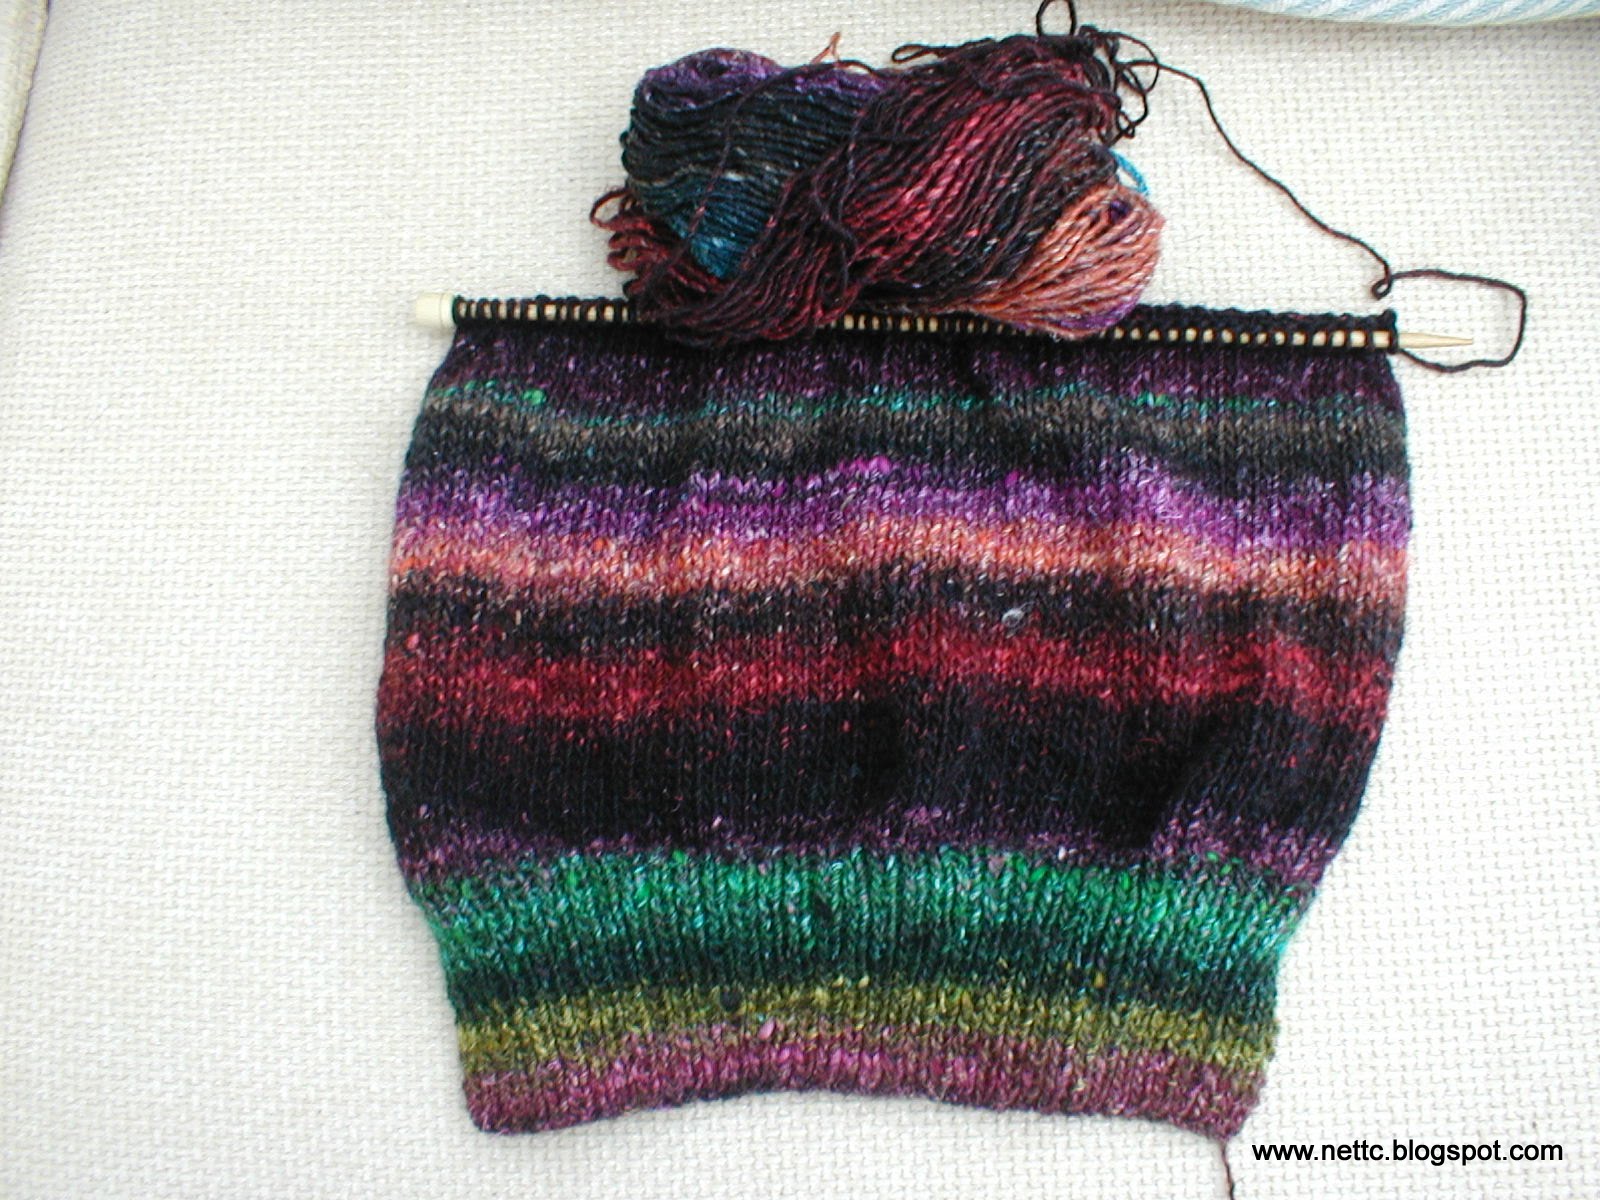 [Ailsa+Knitting+and+Things+009.jpg]